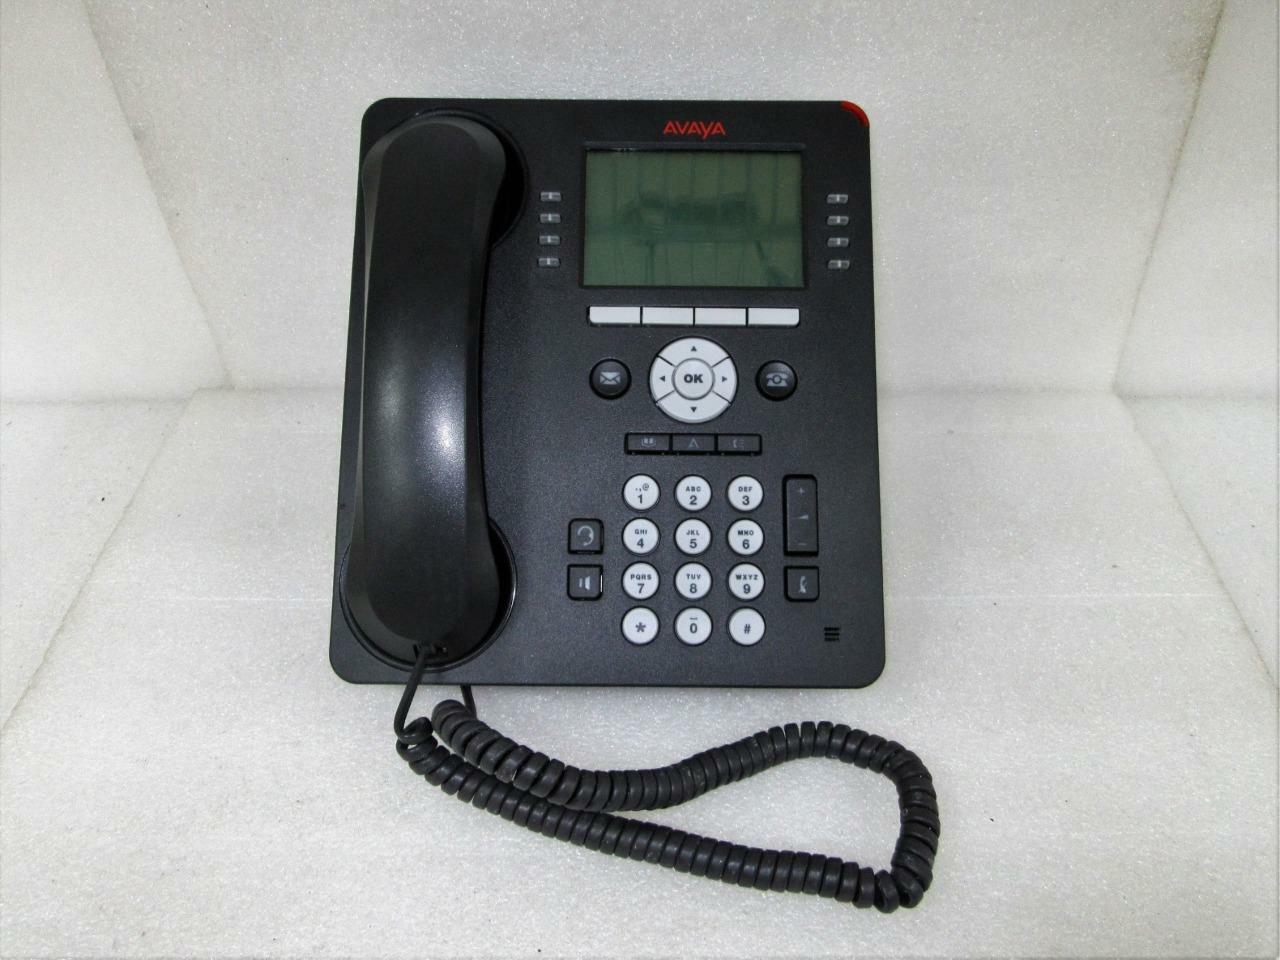 Lot Of 20 Avaya 9608G VoIP Digital Business Phone w/ Handset, Cord, Stand